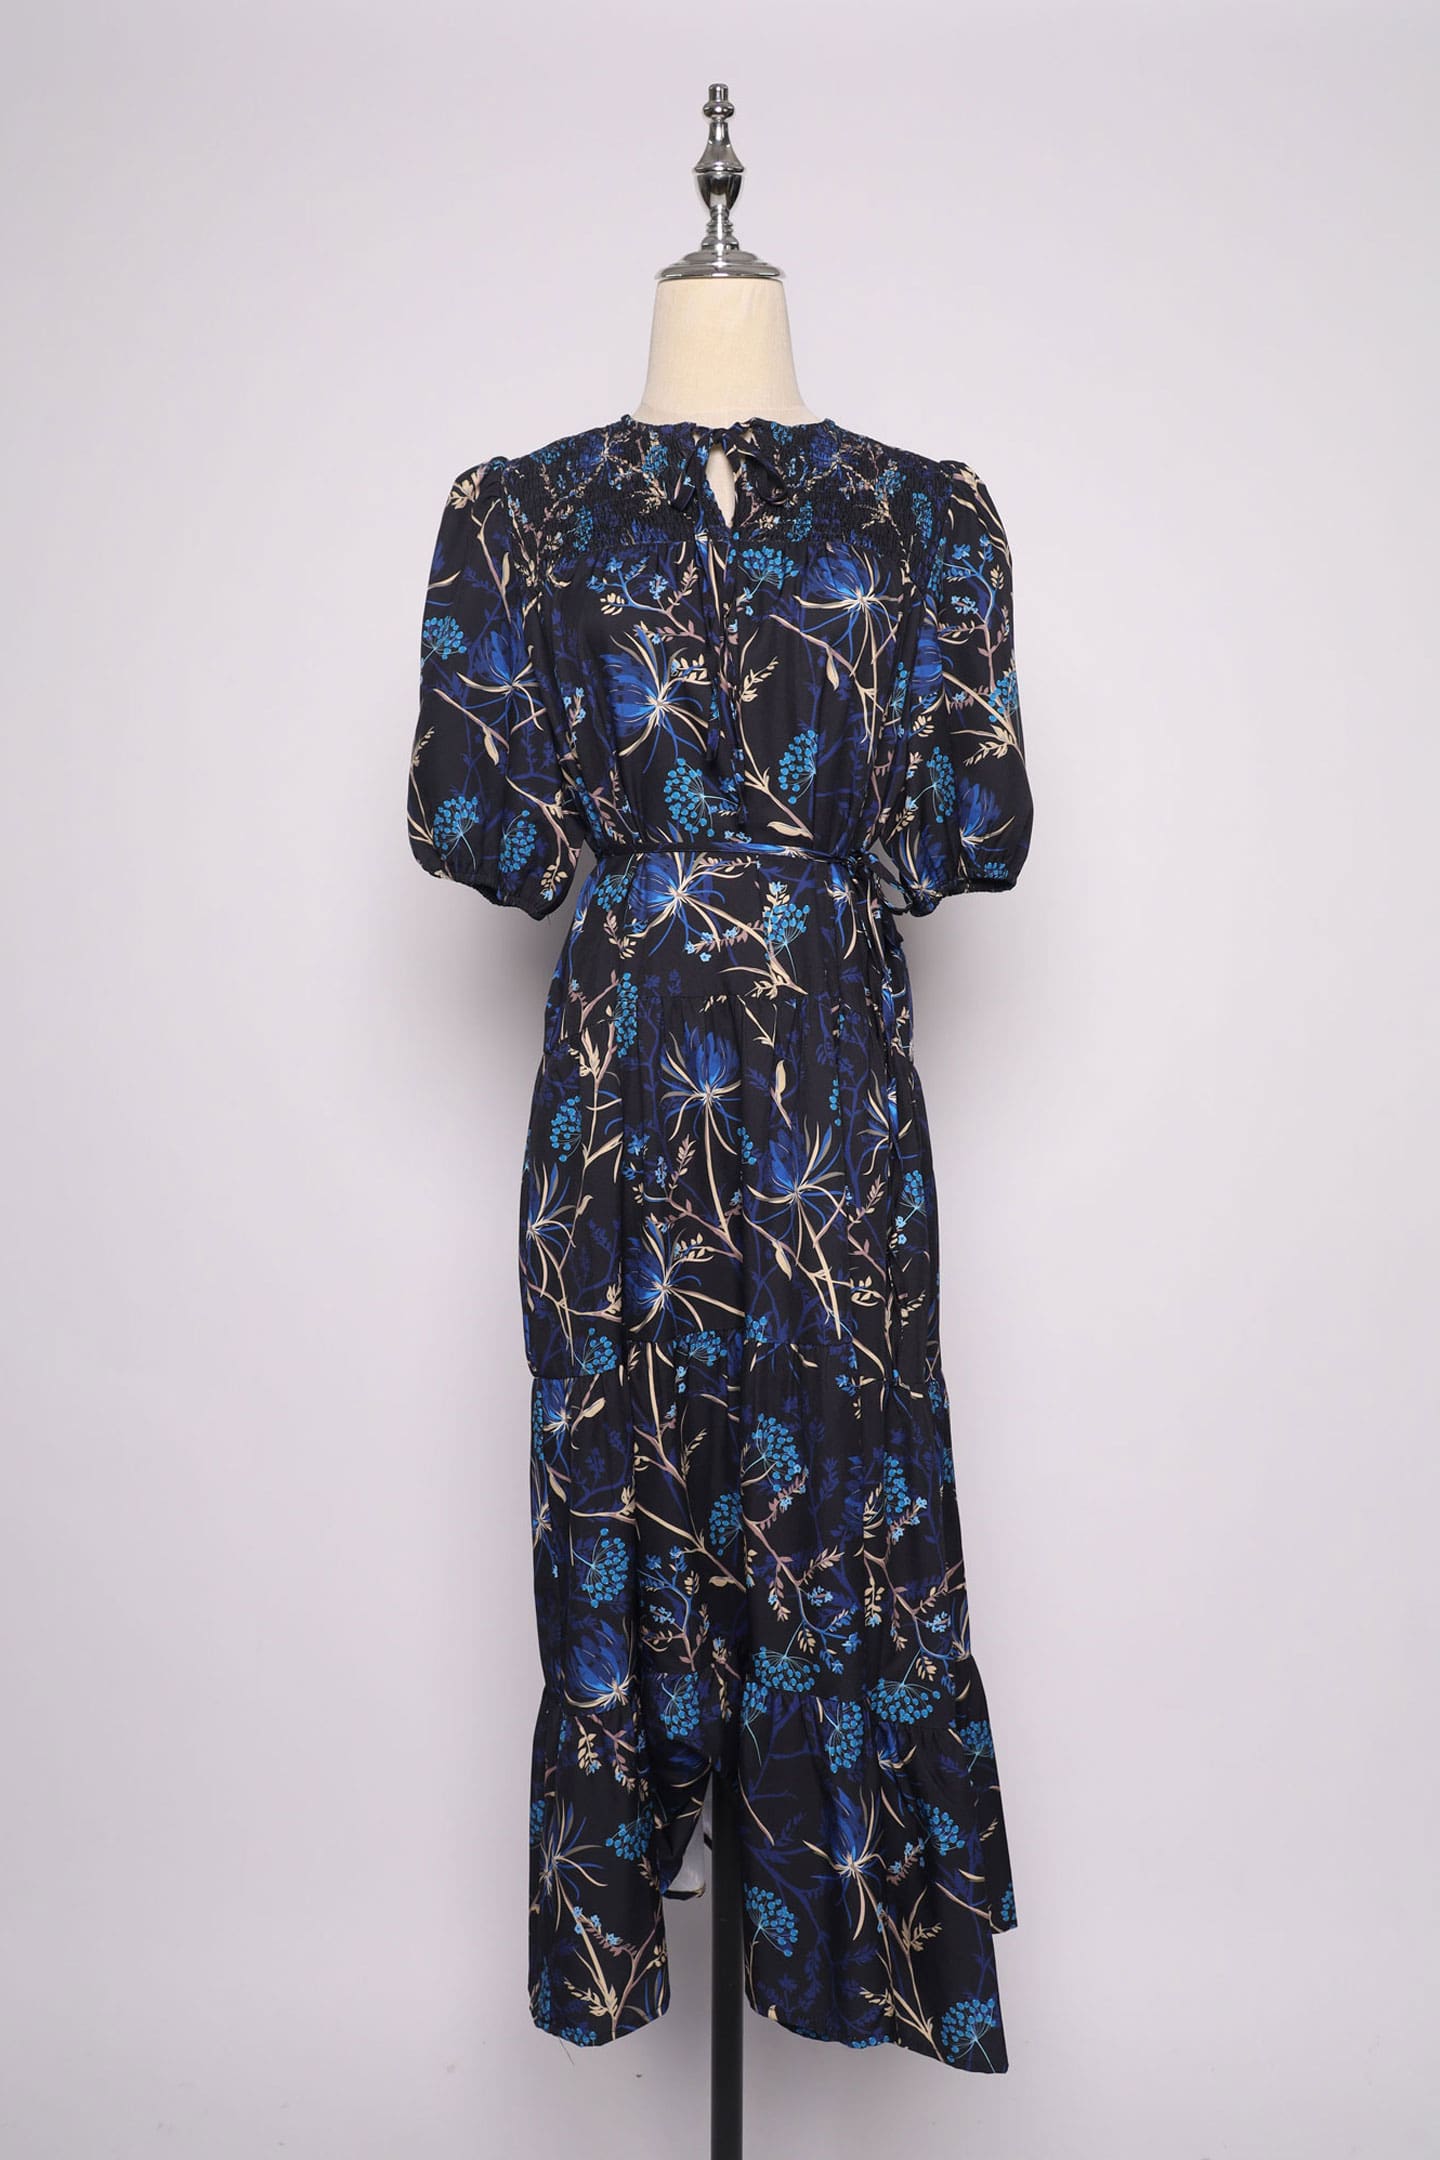 PO - Alina Dress in Blue Forest